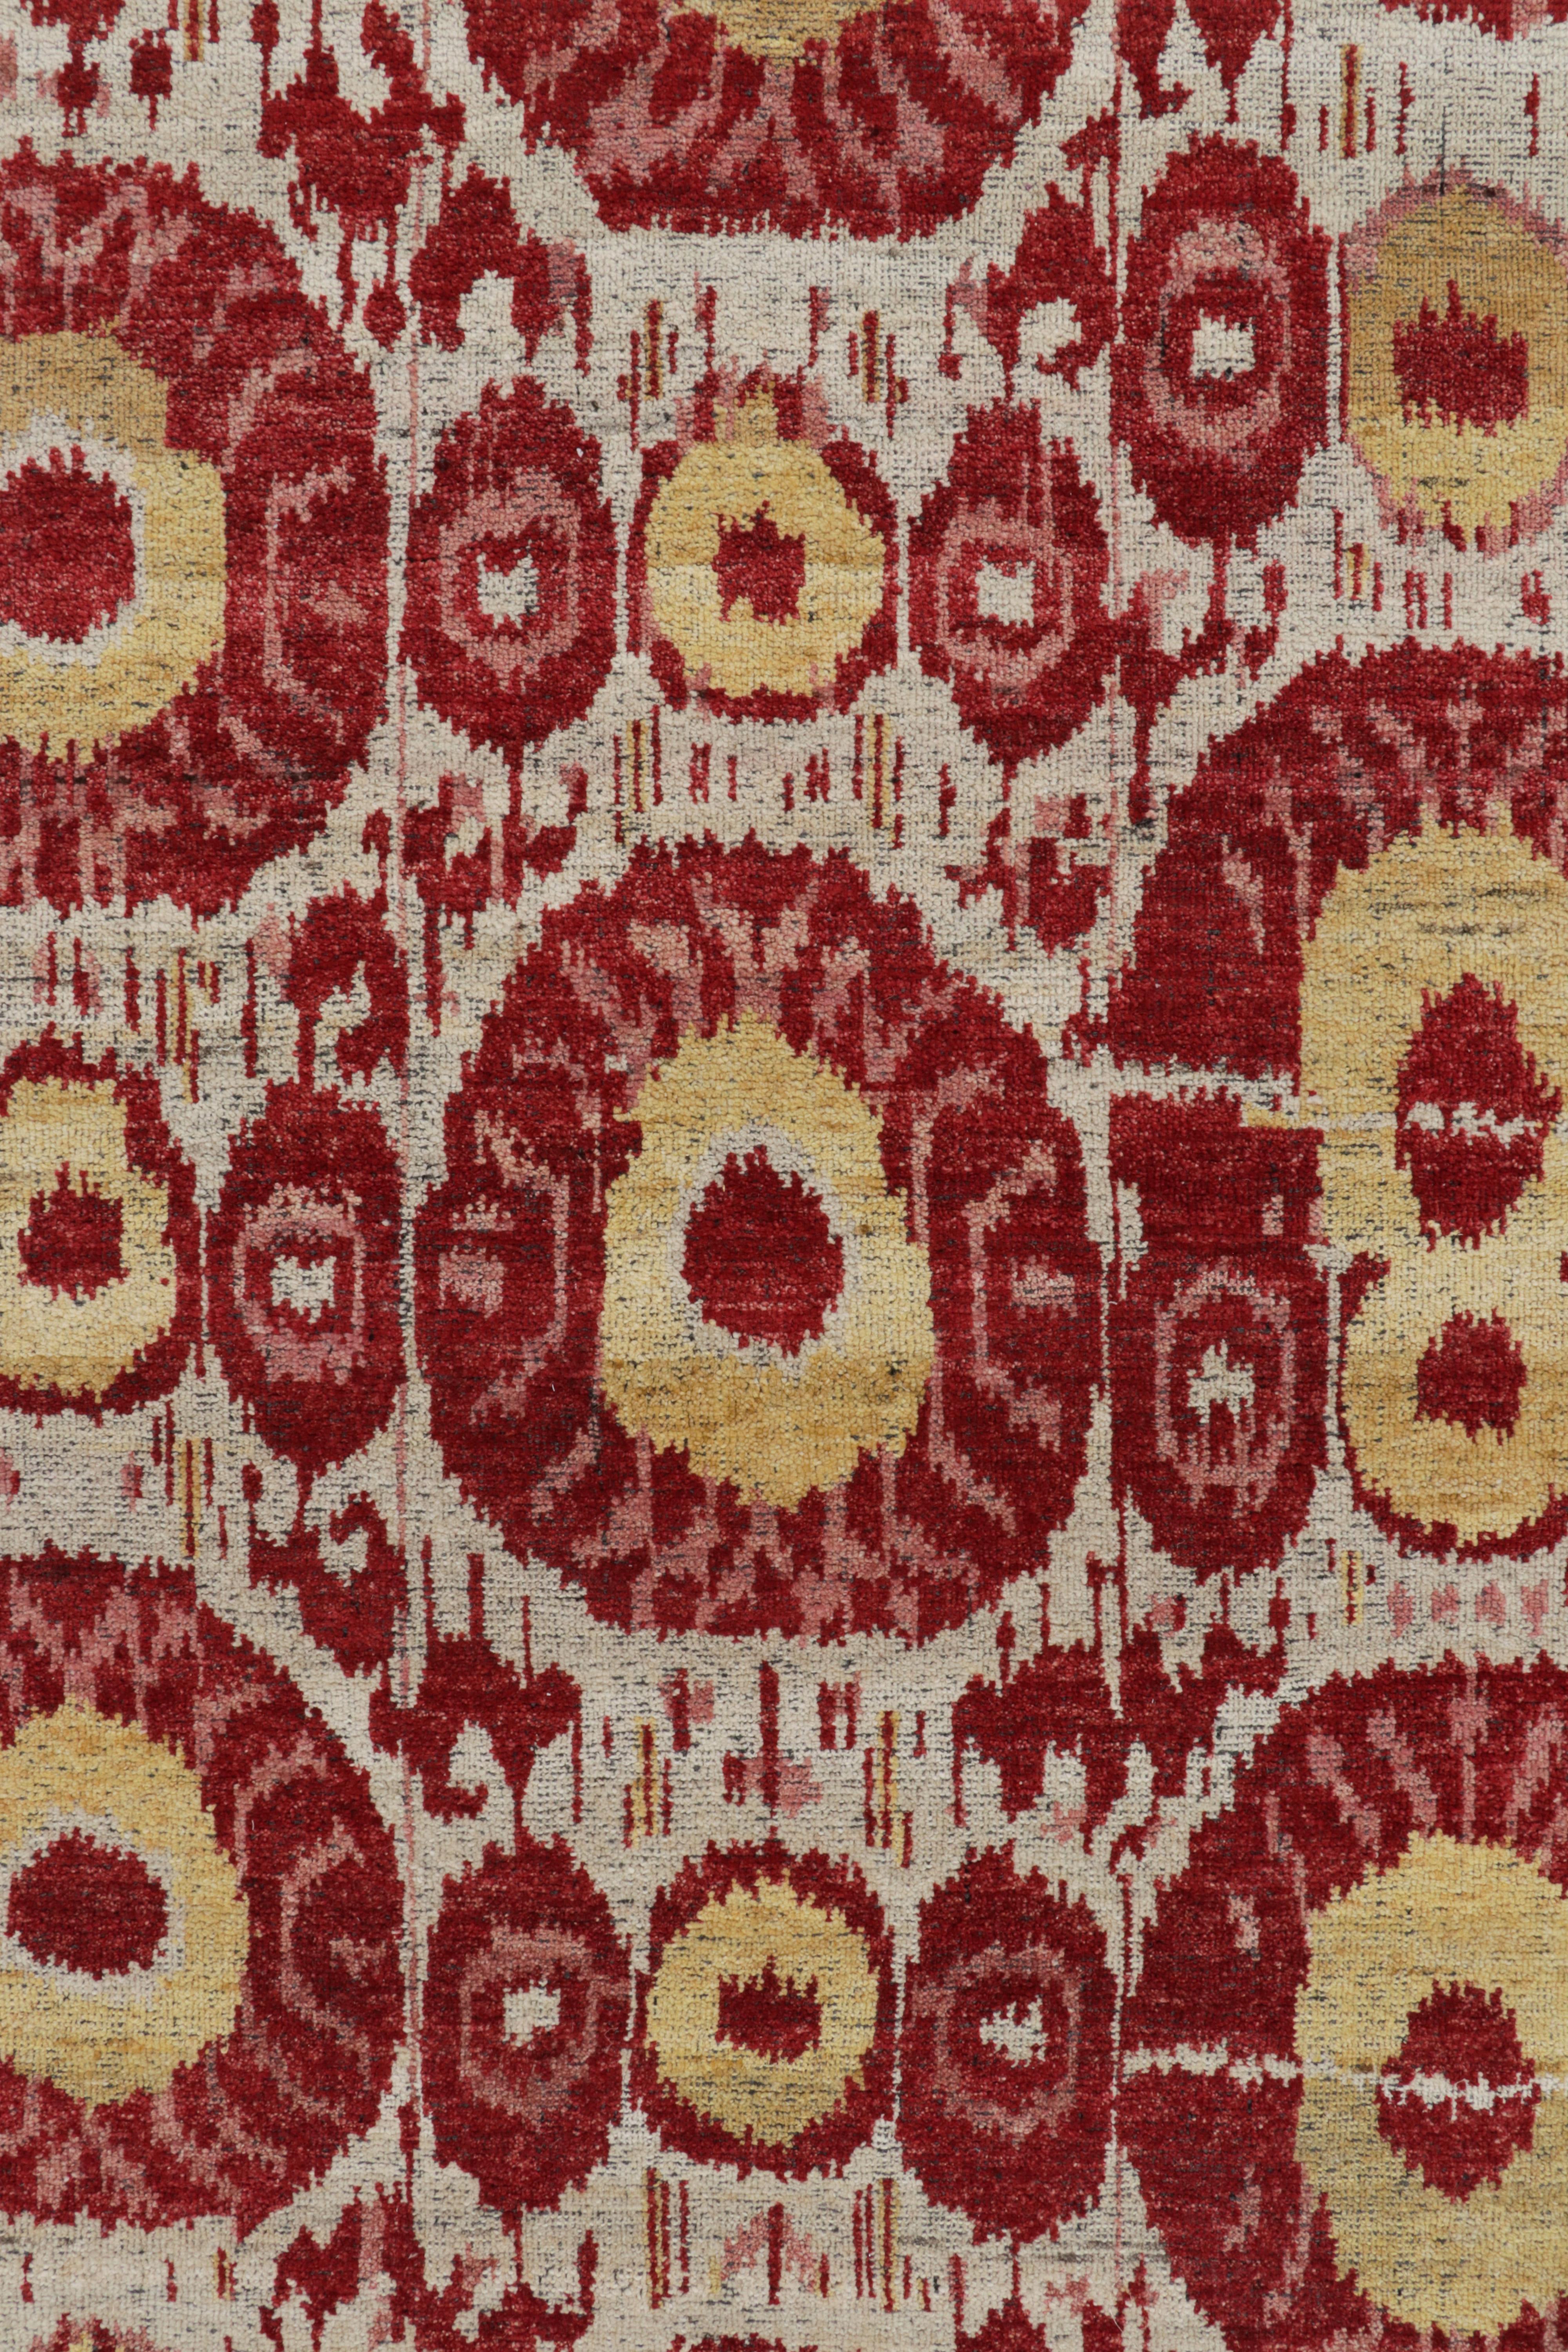 Contemporary Rug & Kilim's Tribal Style rug in Red, Yellow, Green, White Ikats Pattern For Sale